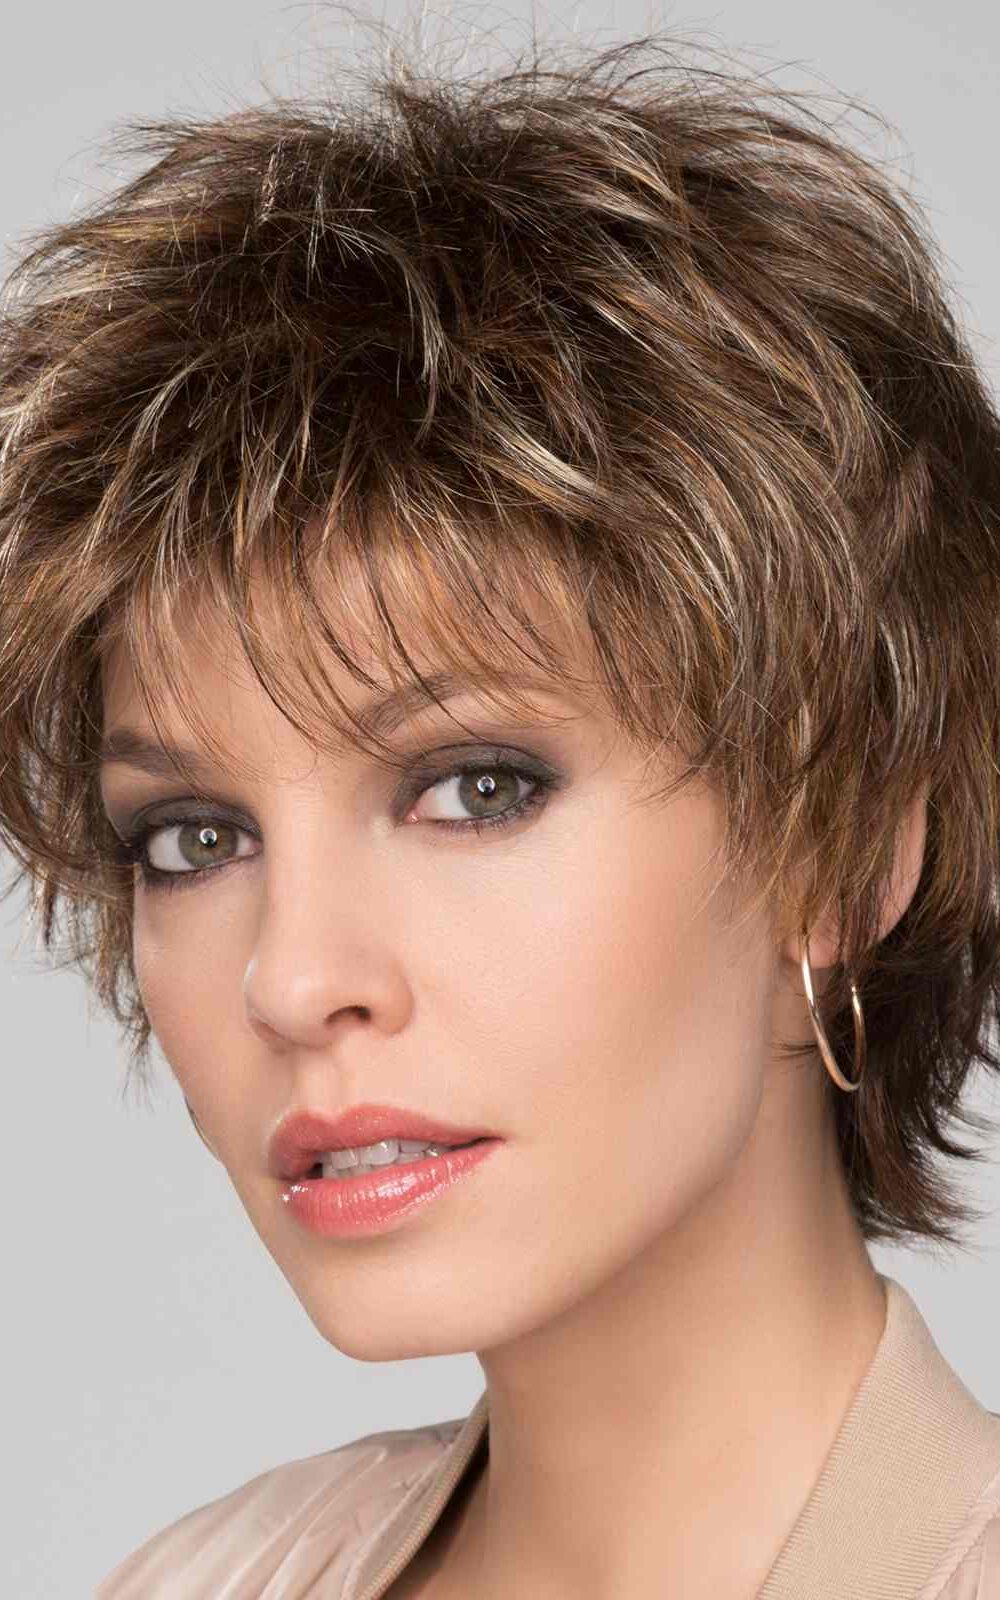 Click Wig by Ellen Wille | Tobacco Mix| Edgy layers can be styled modern or classic